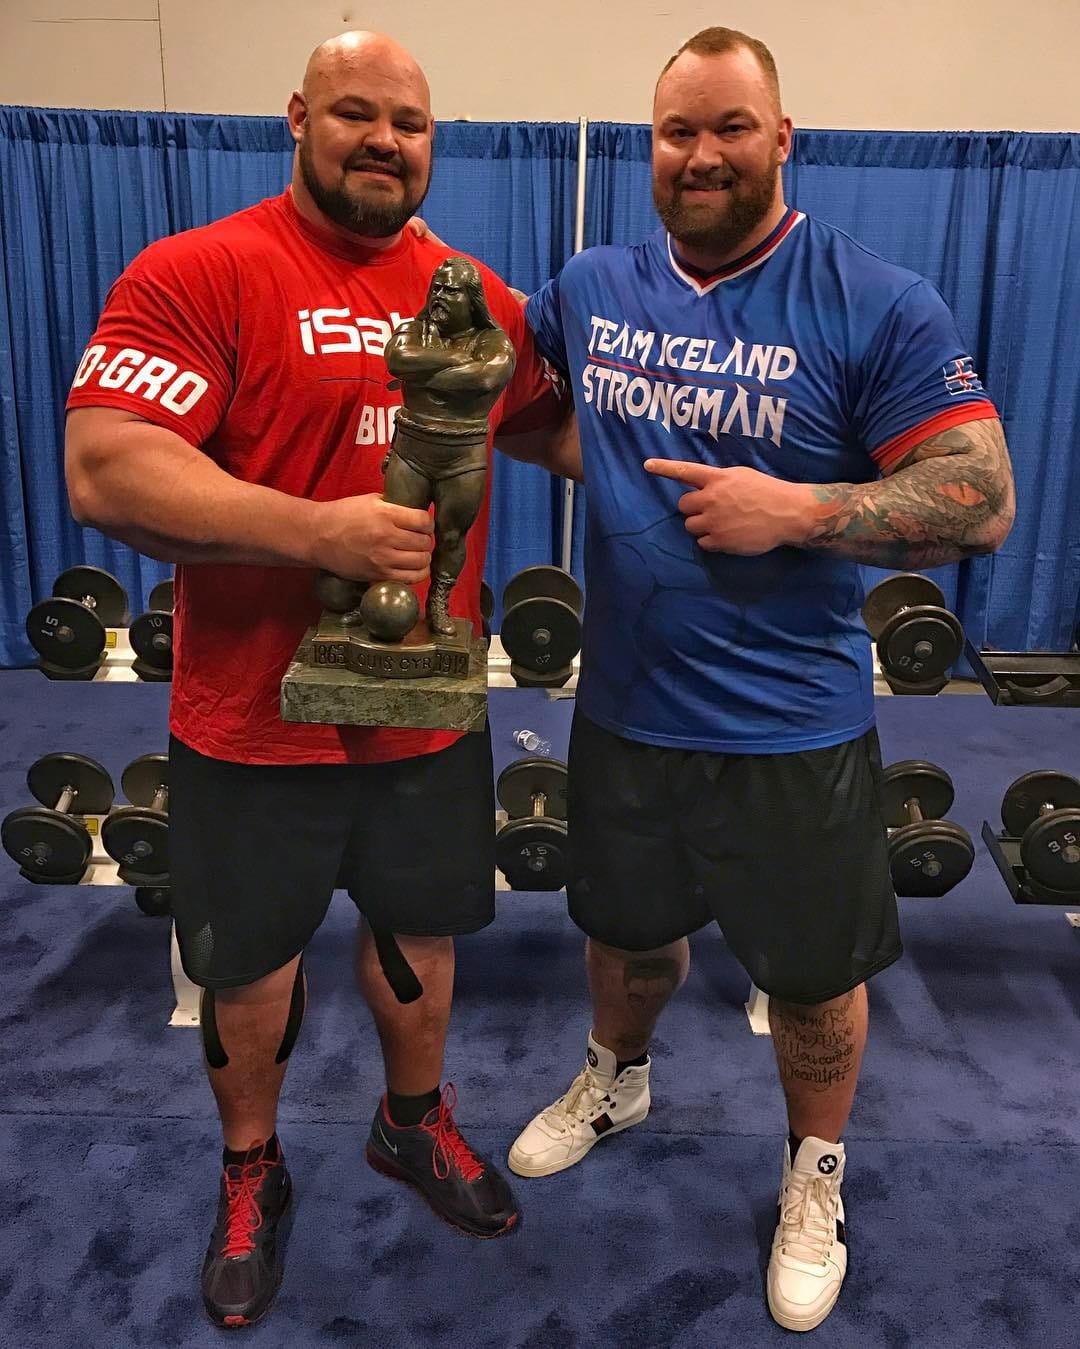 Congratulations @shawstrength on his win at The Arnold Strongman Classic this year. We'll meet again soon. WSM is close and I'm looking forward to our battle there!